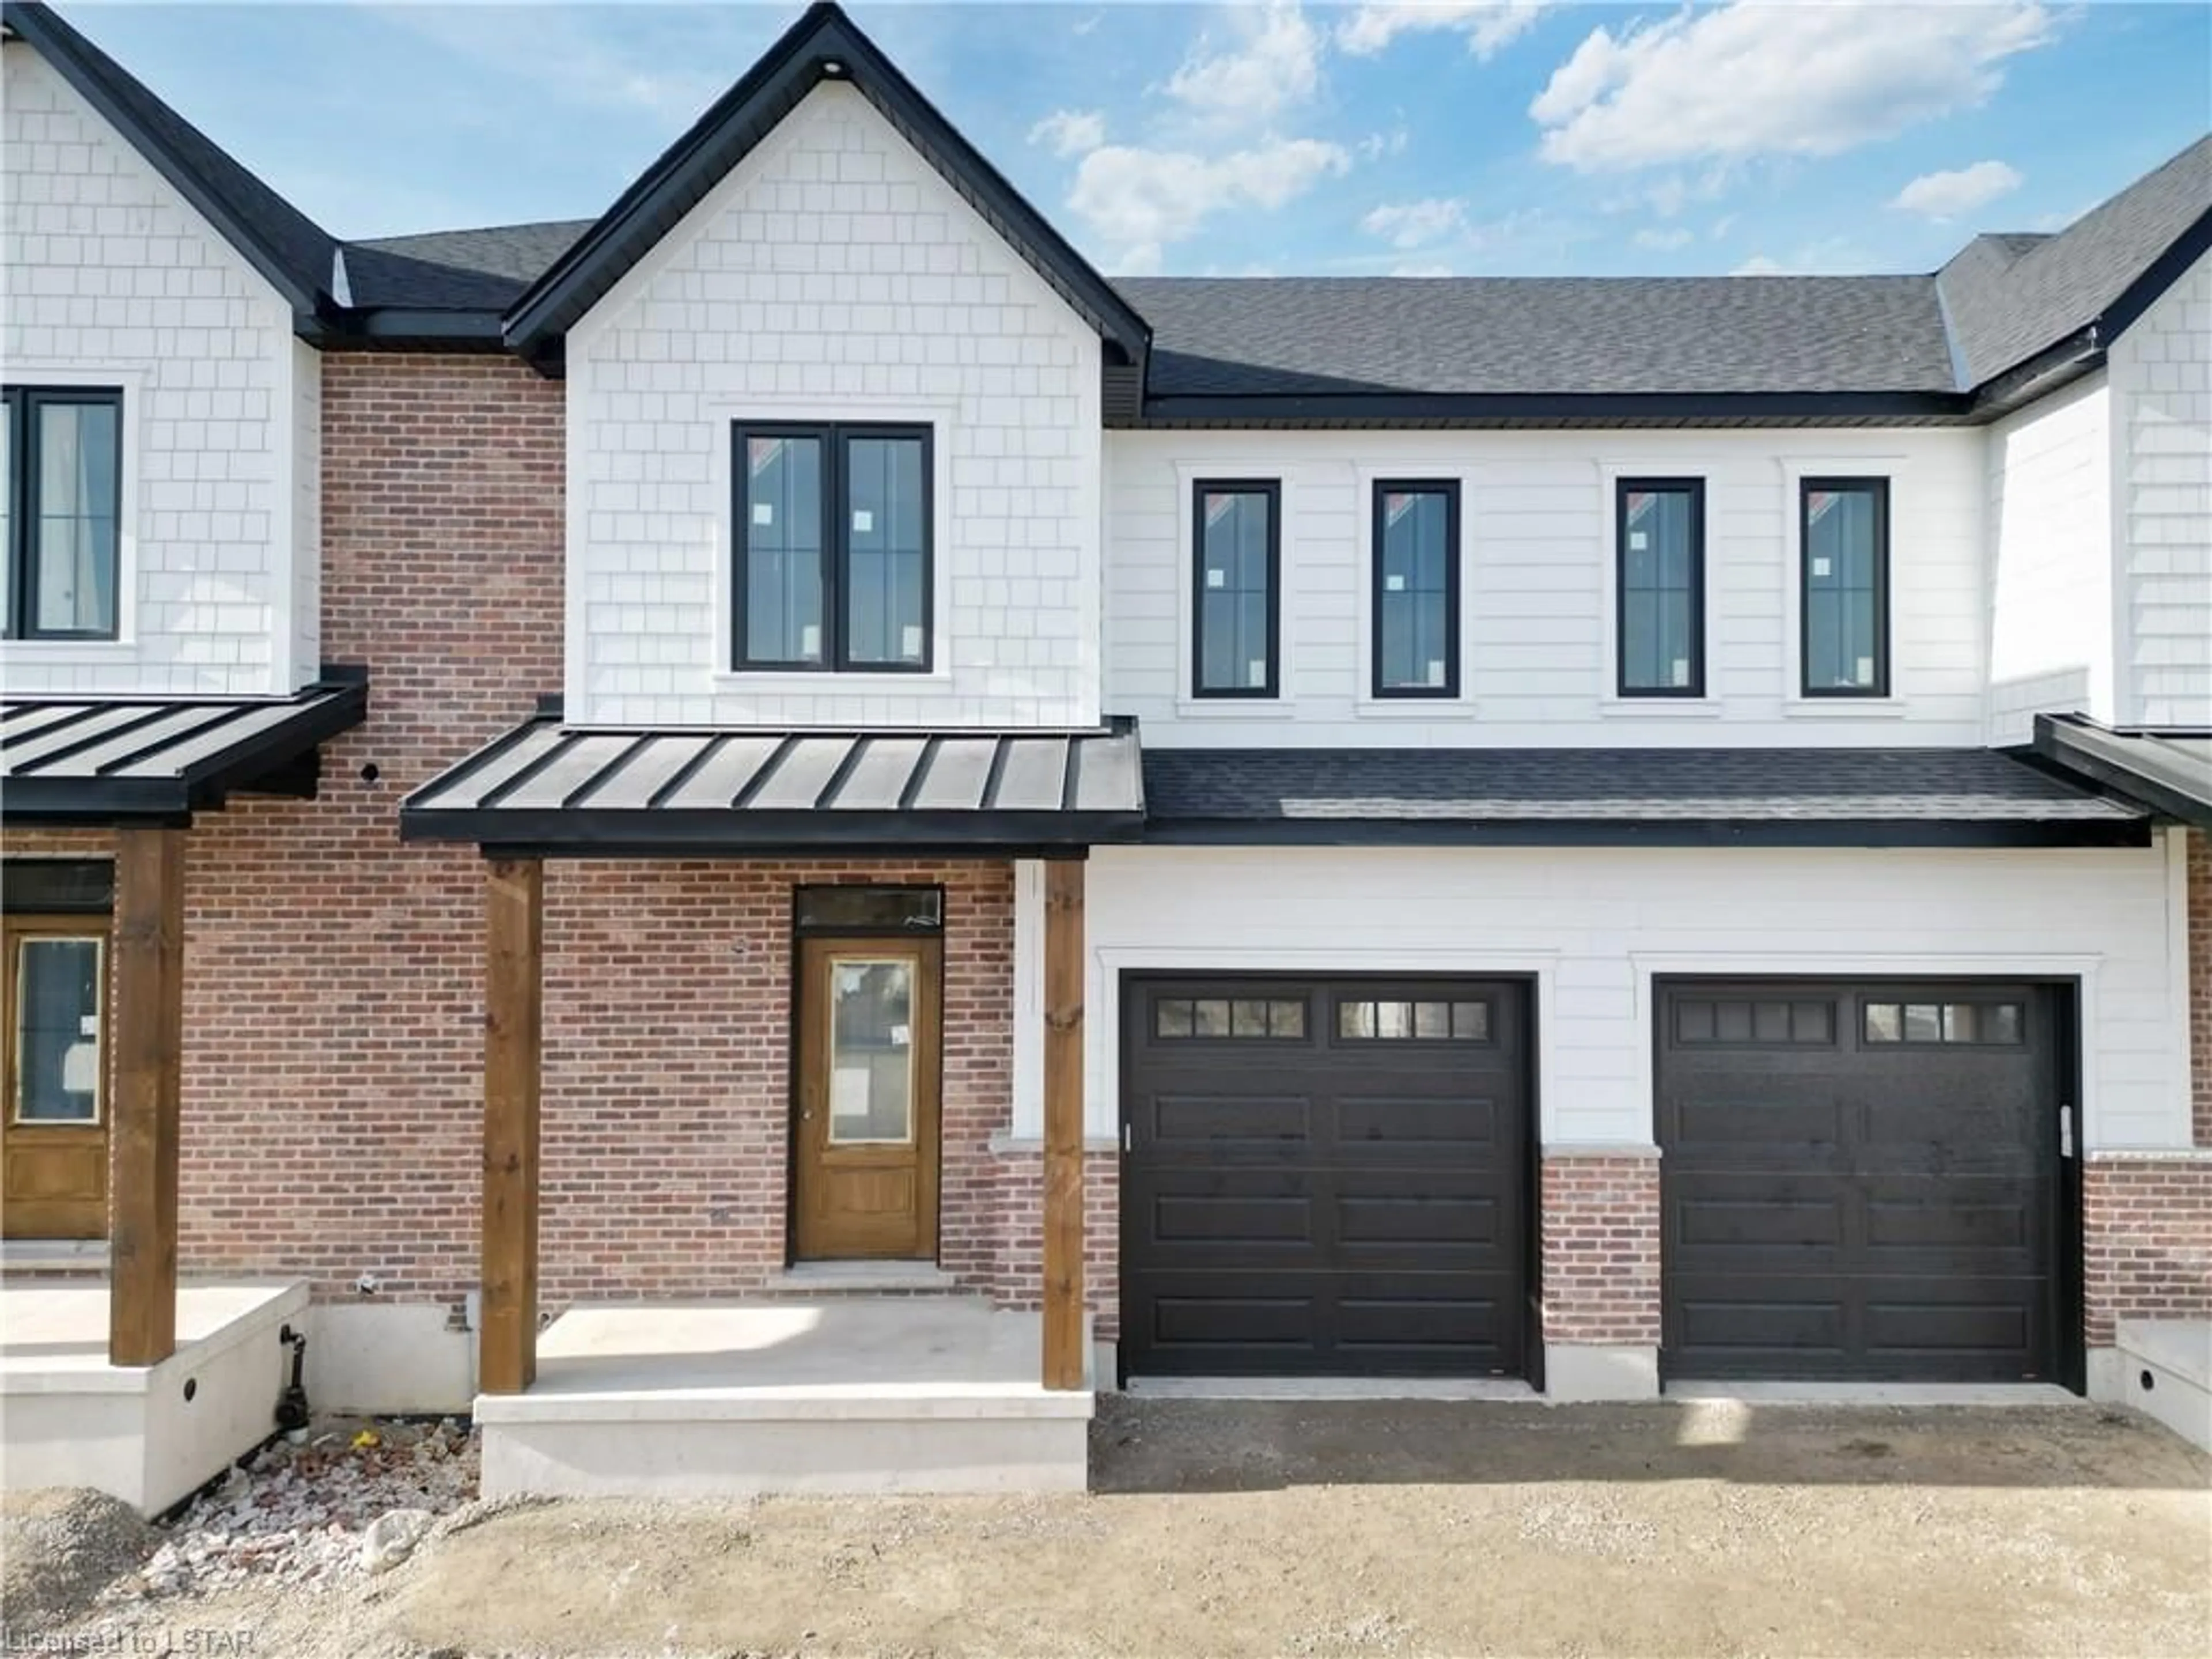 Home with brick exterior material for 147 Scotts Dr #51, Lucan Ontario N0M 2J0